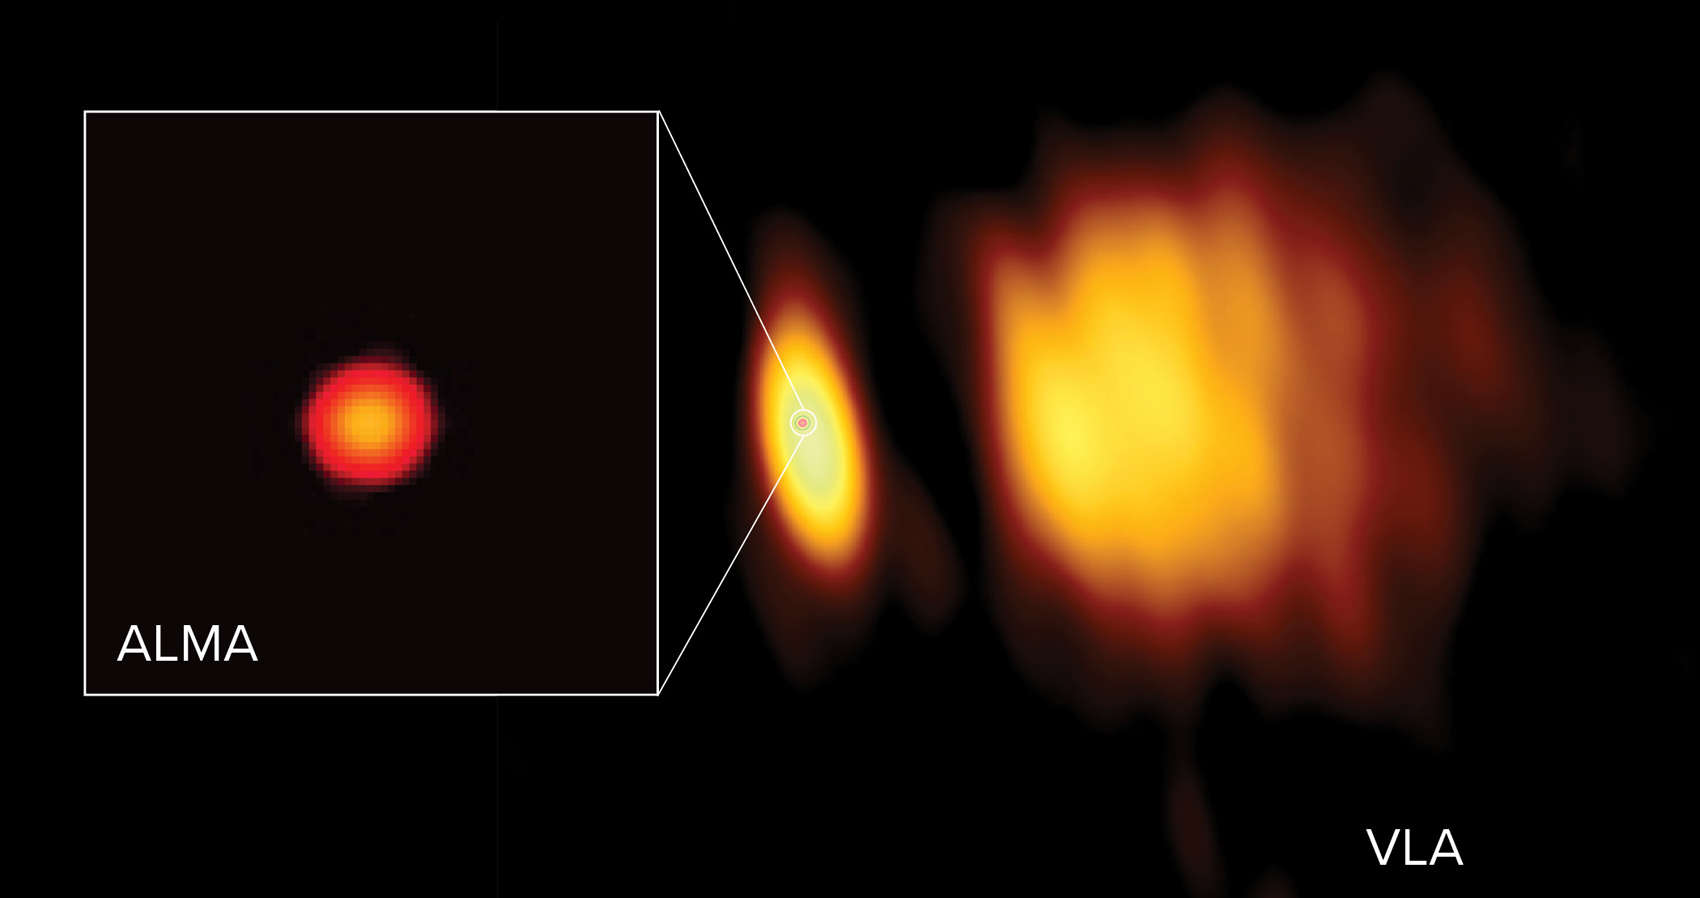 A radio image of Antares using ALMA (left) shows the star’s immense chromosphere, and then shows that in comparison to observations with VLA (right) that show the wind blowing from the star. The material on the right is lit by the binary companion star to